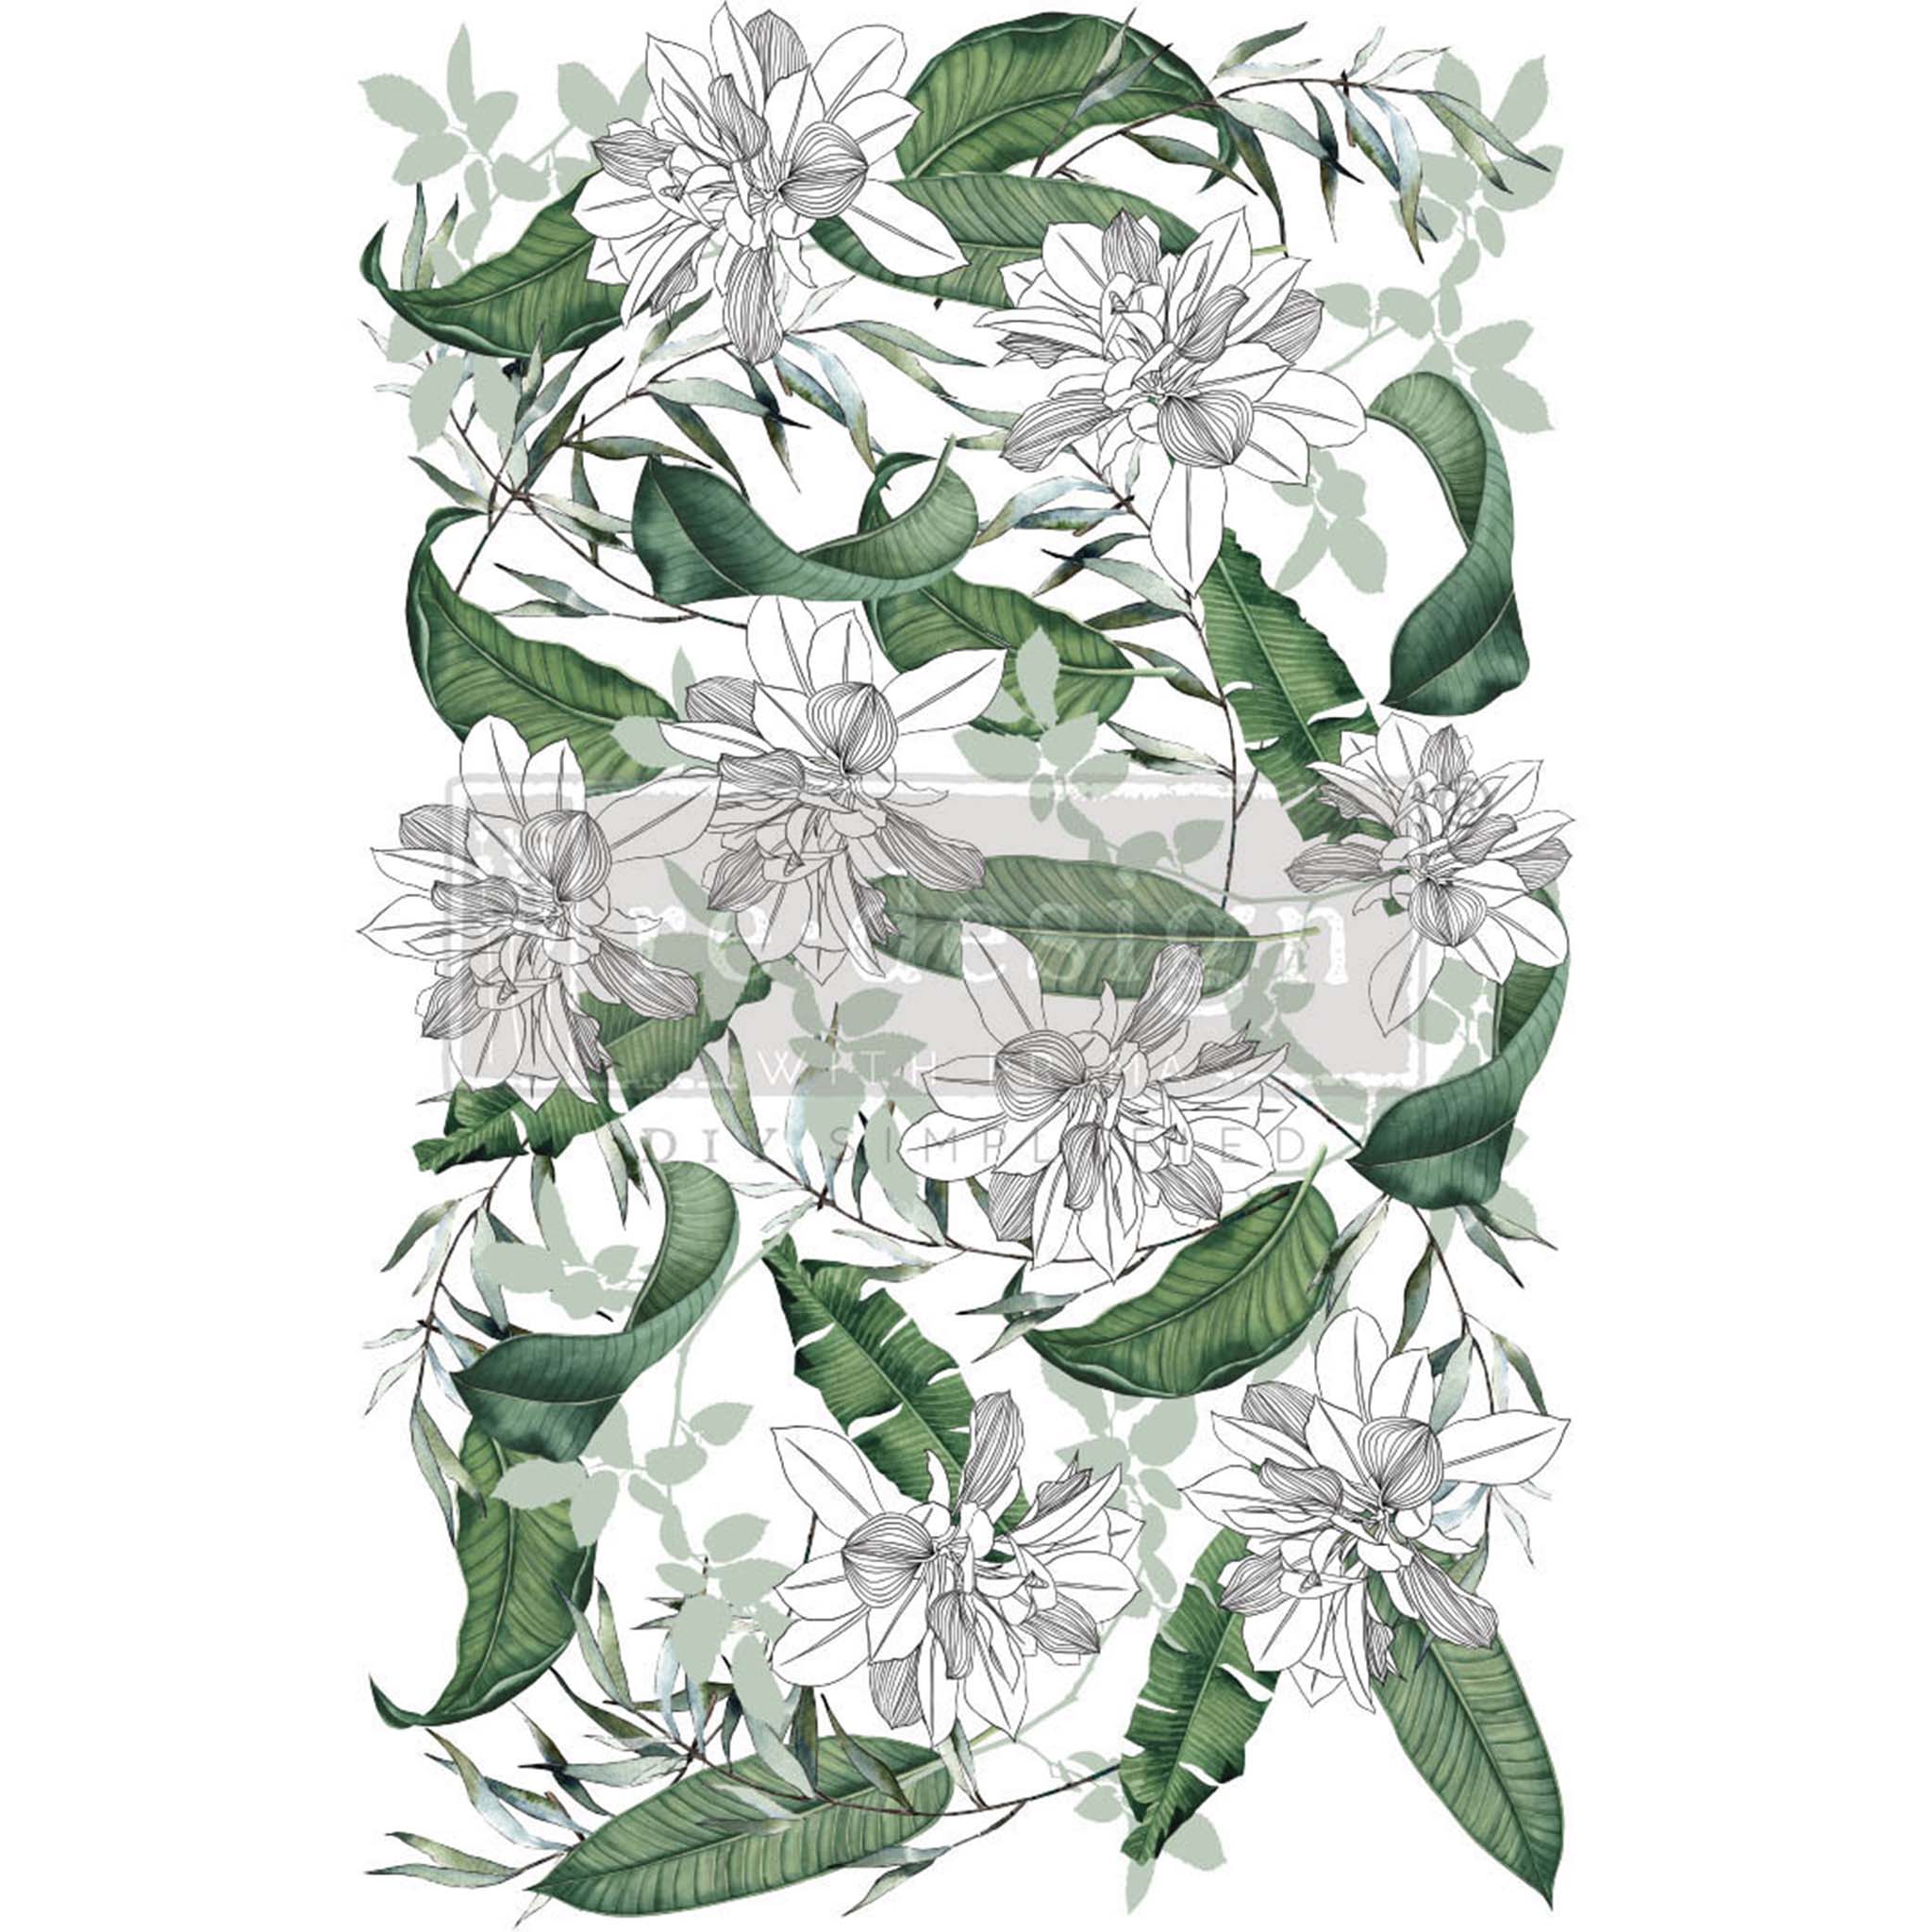 Rub-on transfer design of hand drawn white flowers with green leaves. White borders are on the sides.